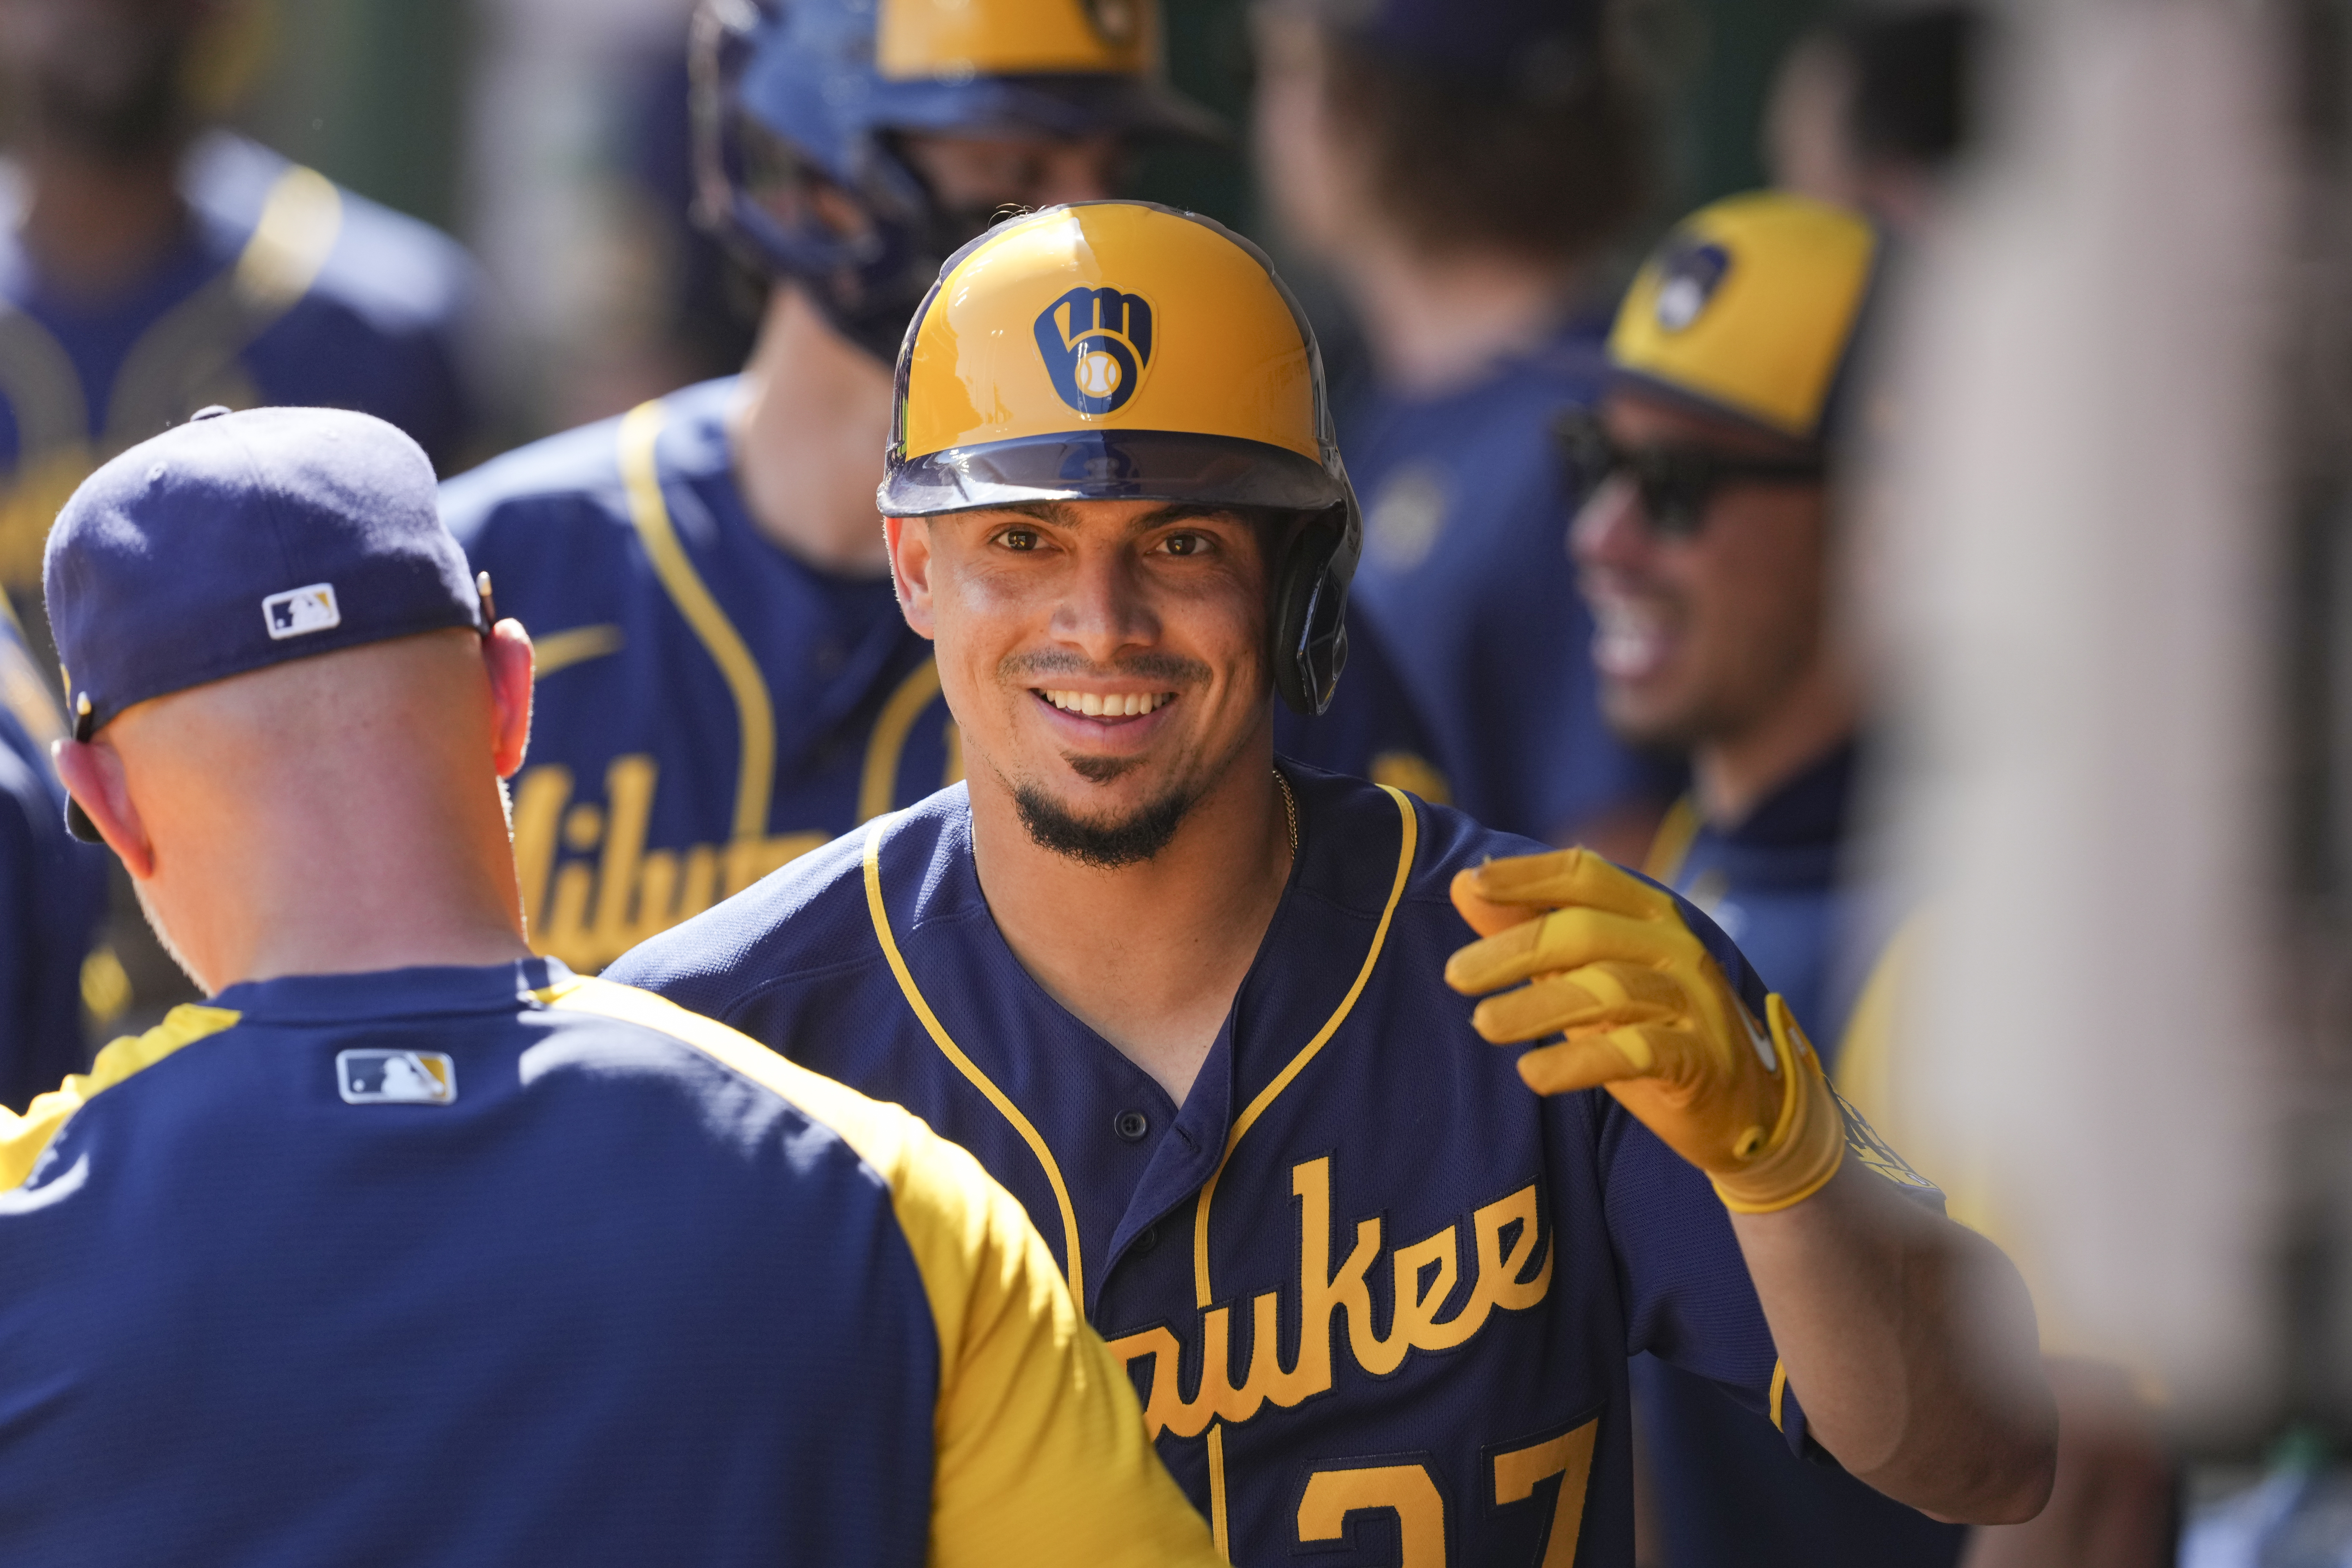 Will Willy Adames ascend to new heights in 2021? - DRaysBay